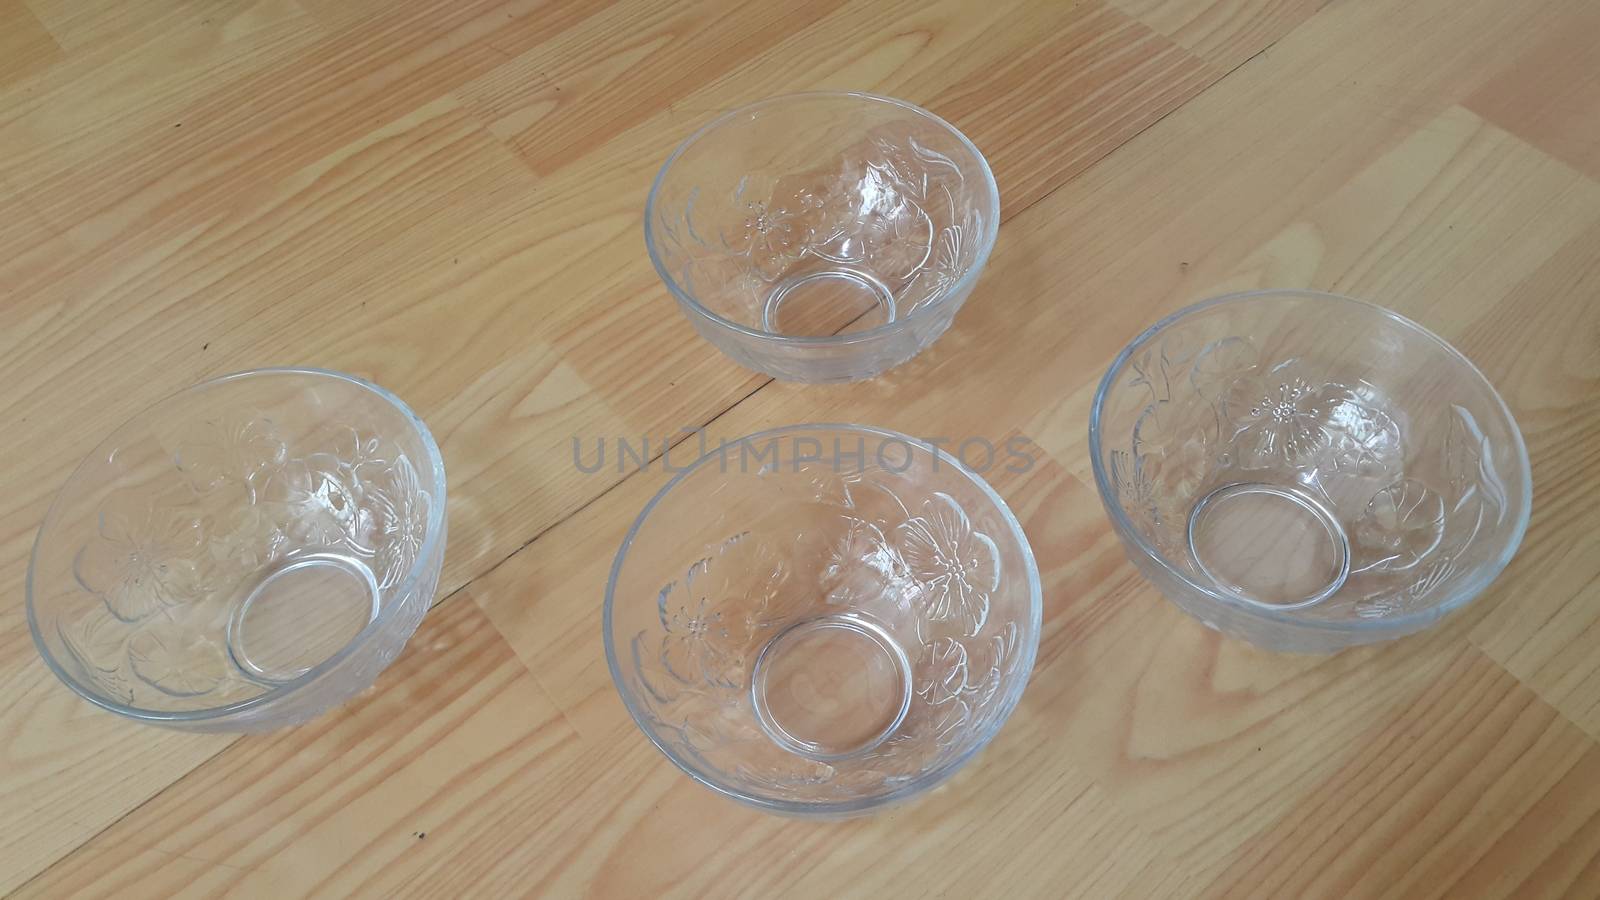 Top view of empty white glass bowls on a wooden floor by Photochowk